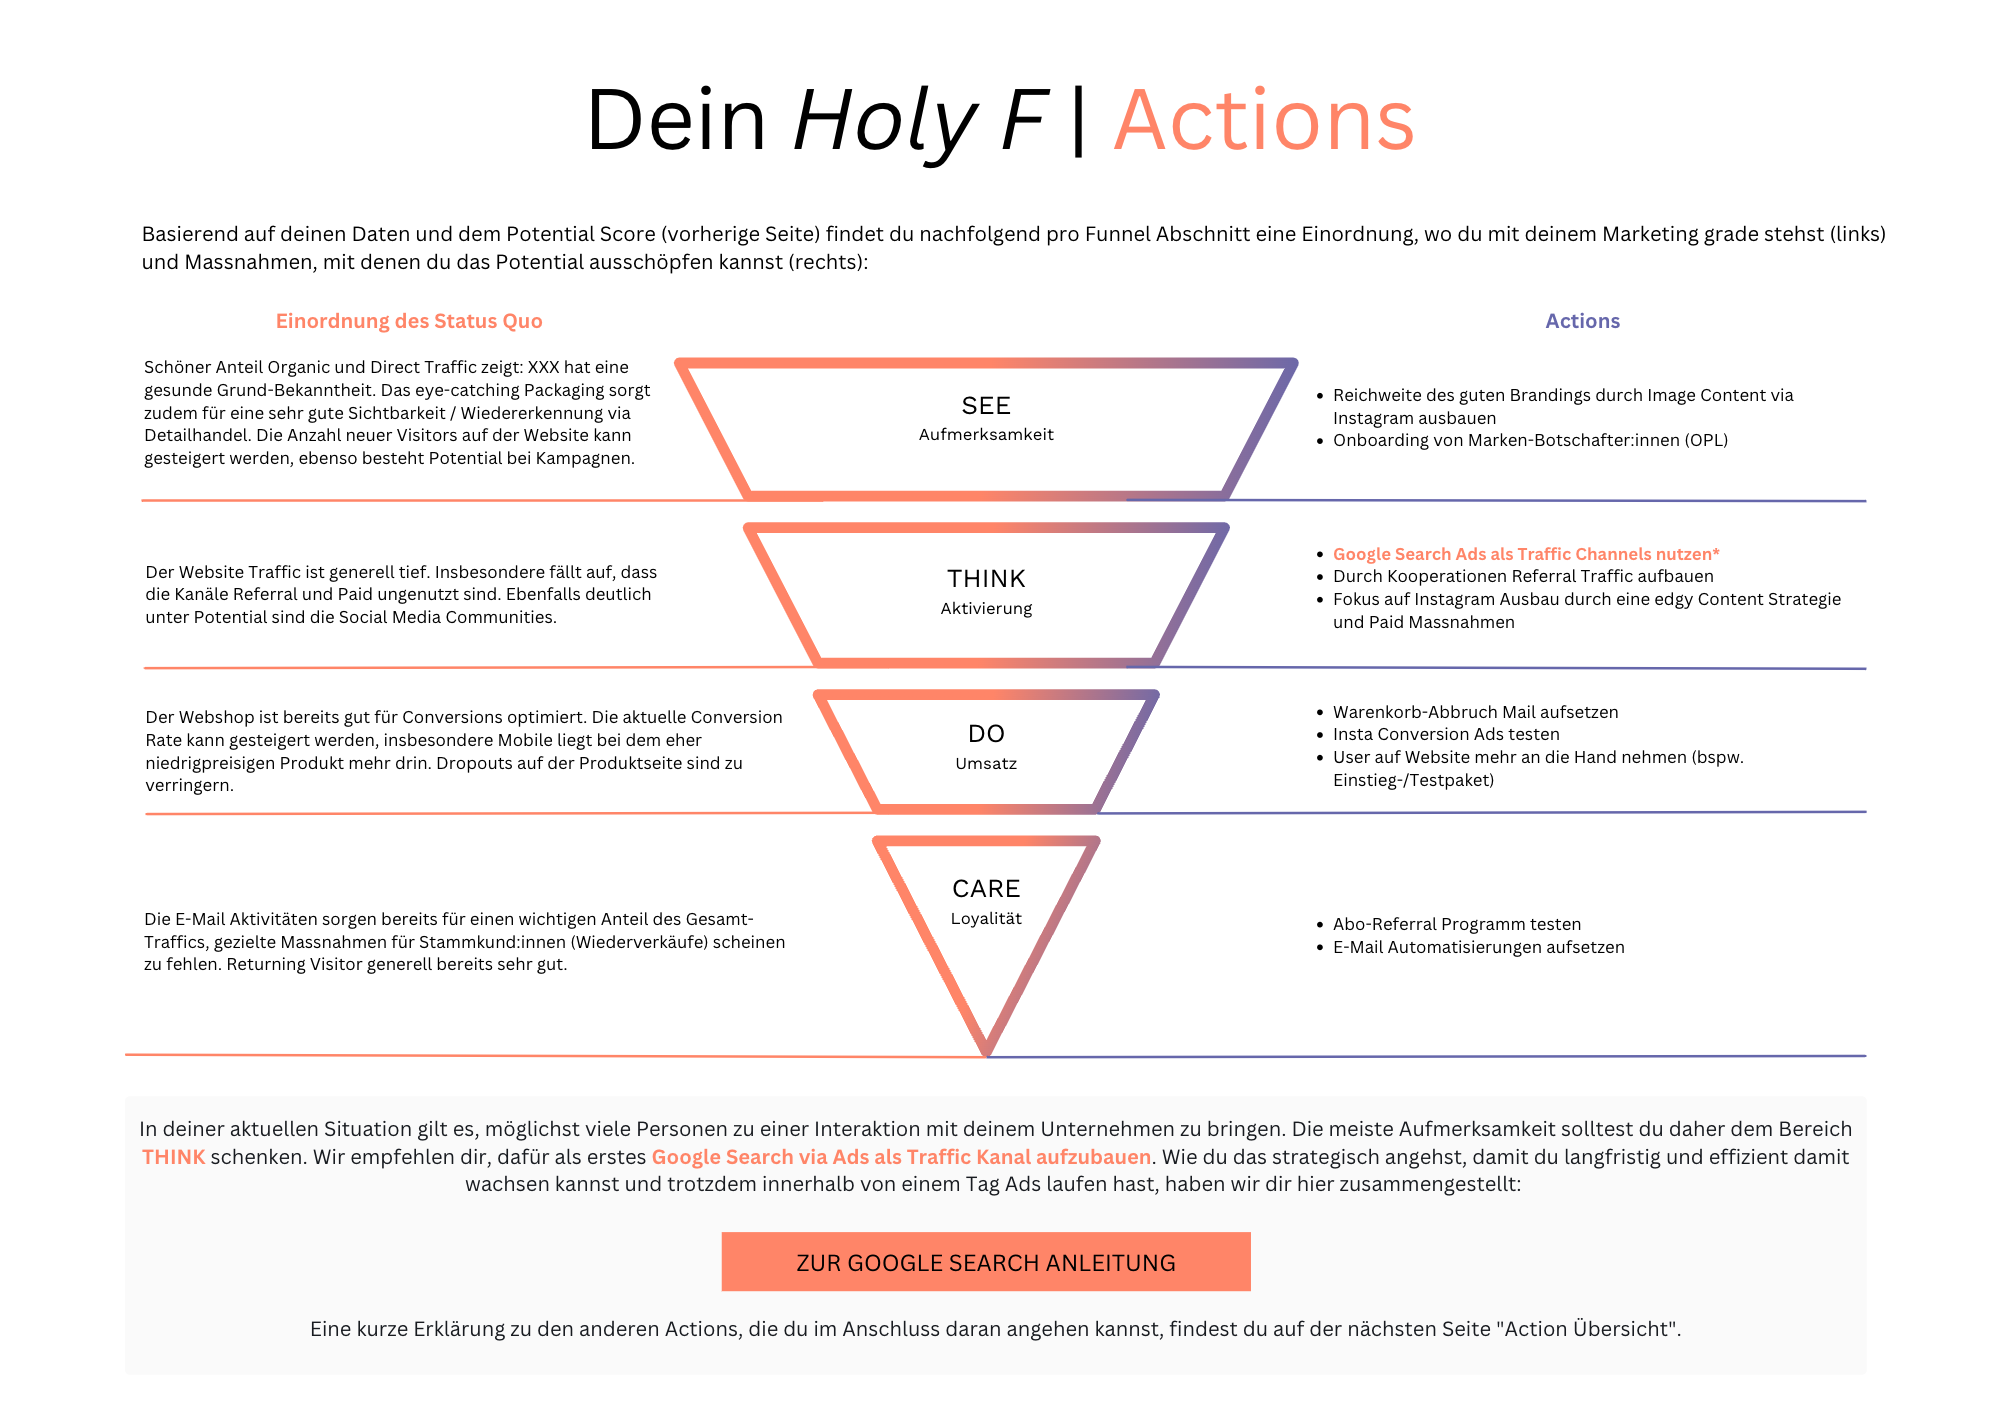 Holy F Digital Marketing Funnel SEE THINK DO CARE 